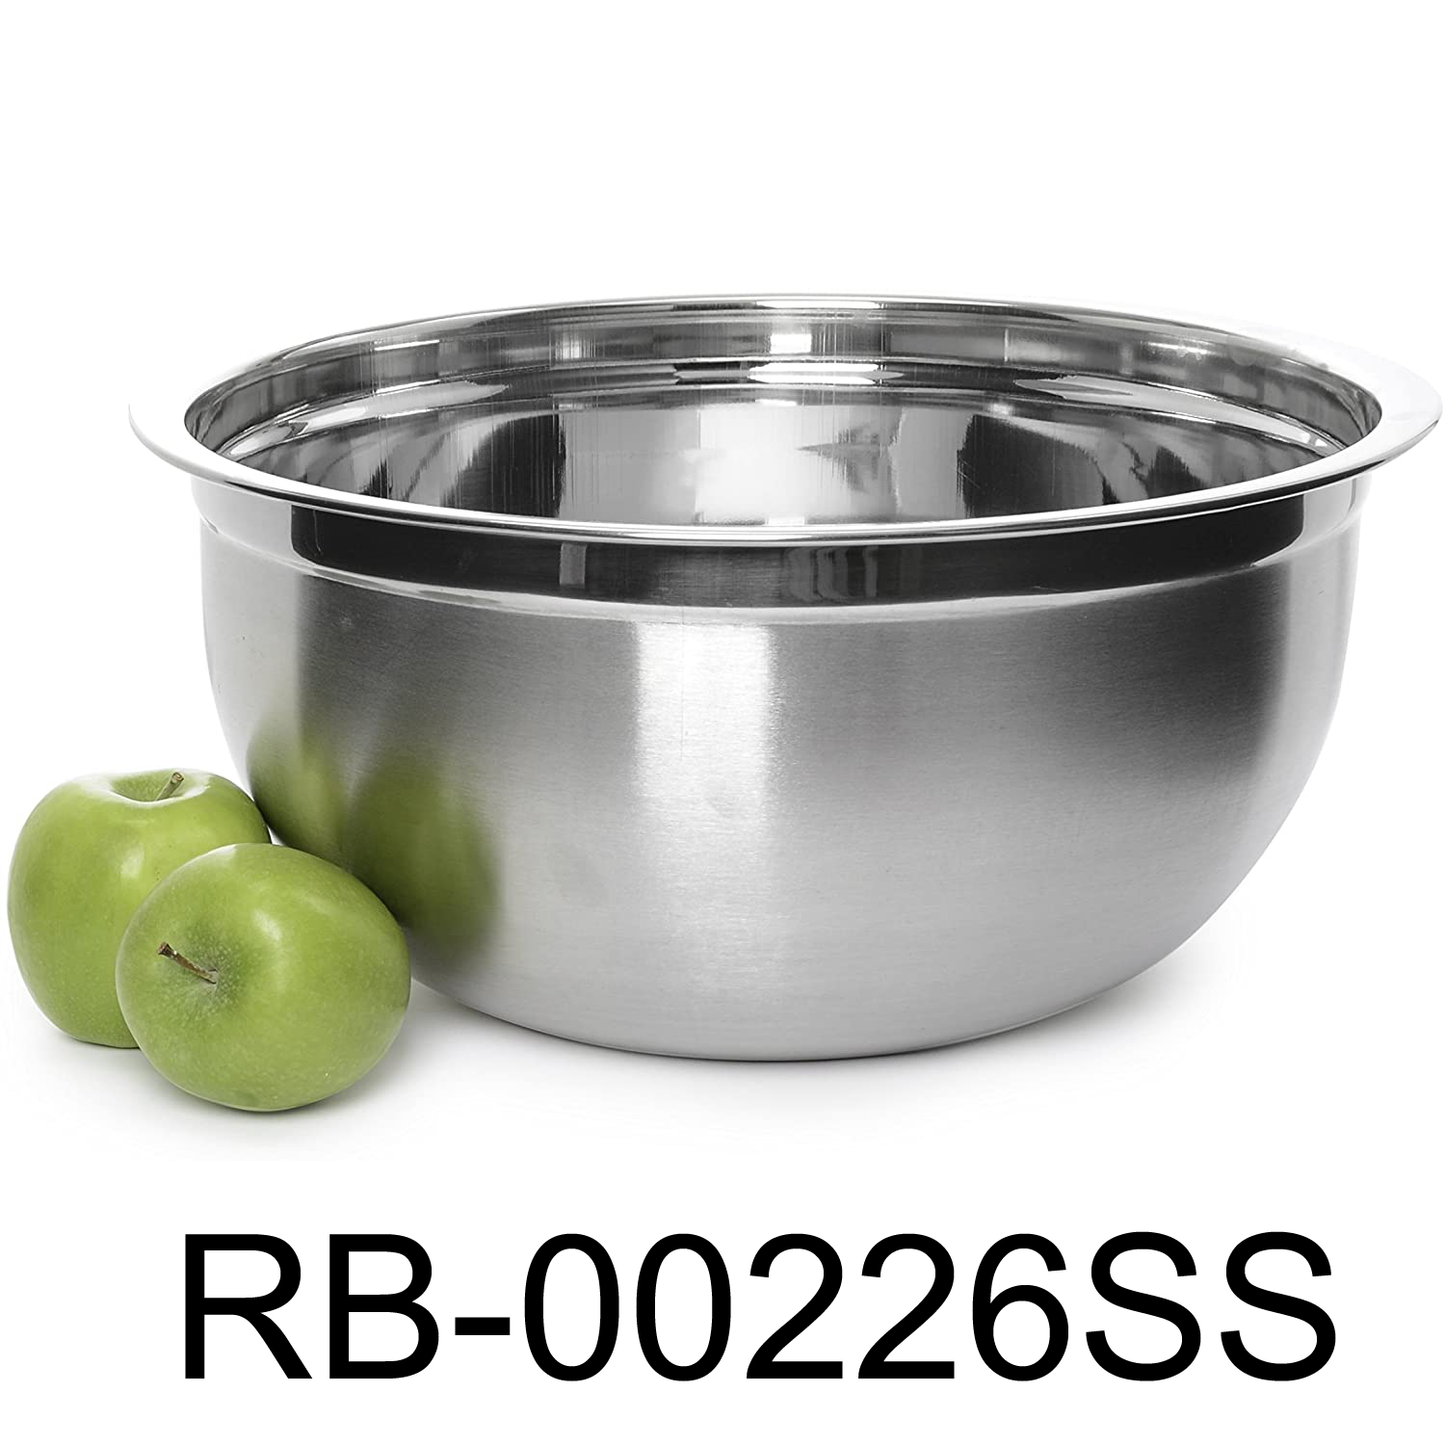 26cm Stainless Steel Basin Mixing Bowl